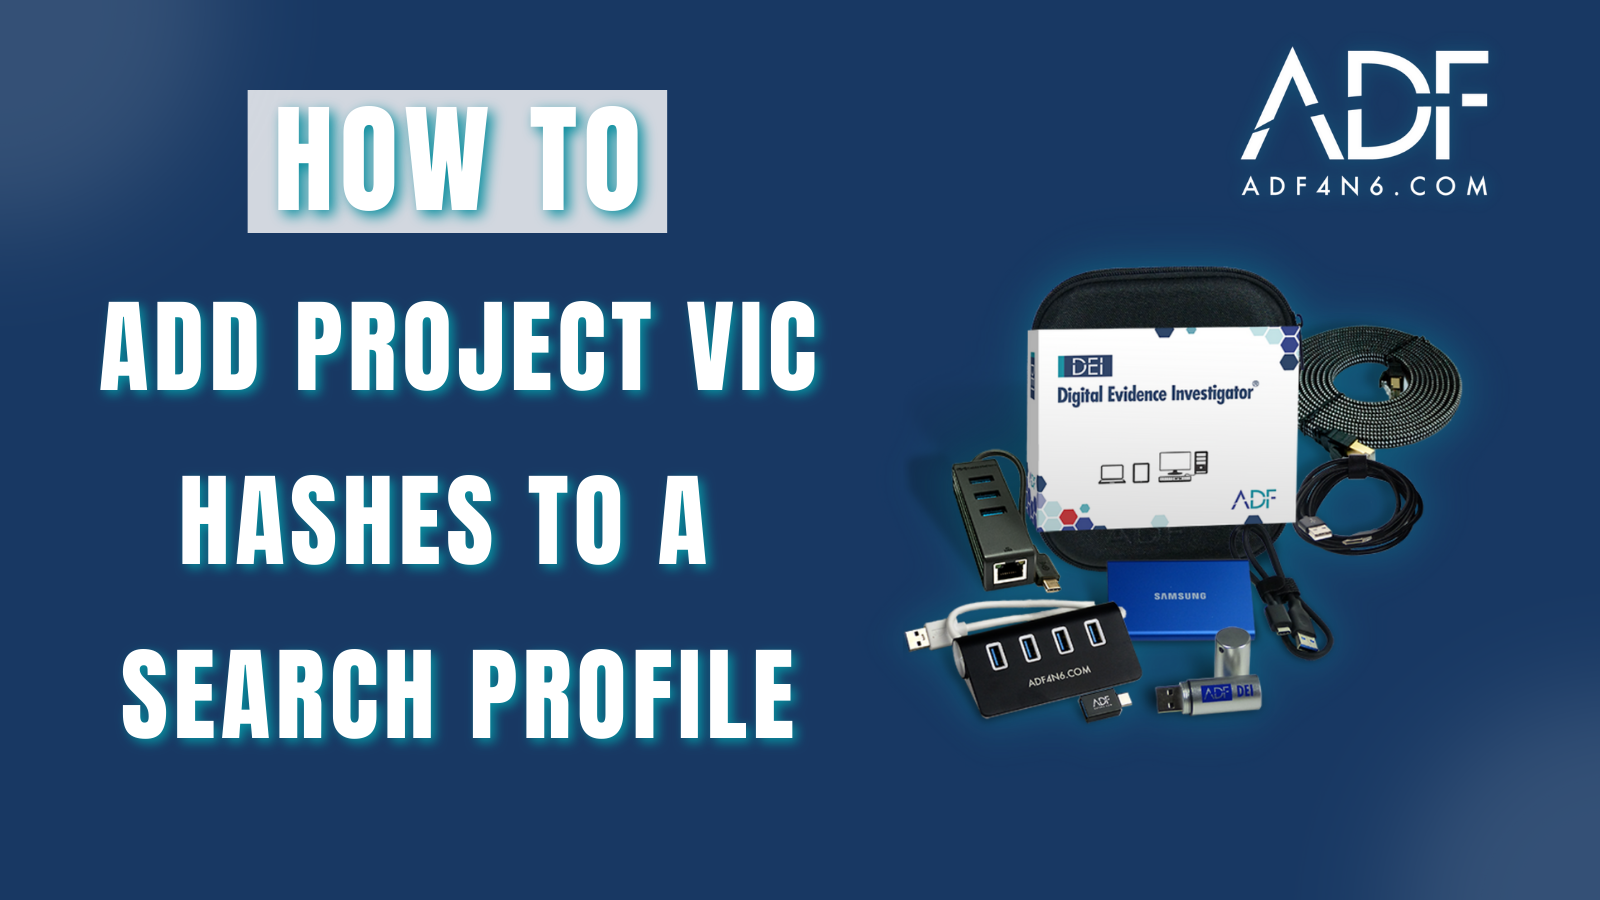 Adding Project Vic Hashes to a Search Profile